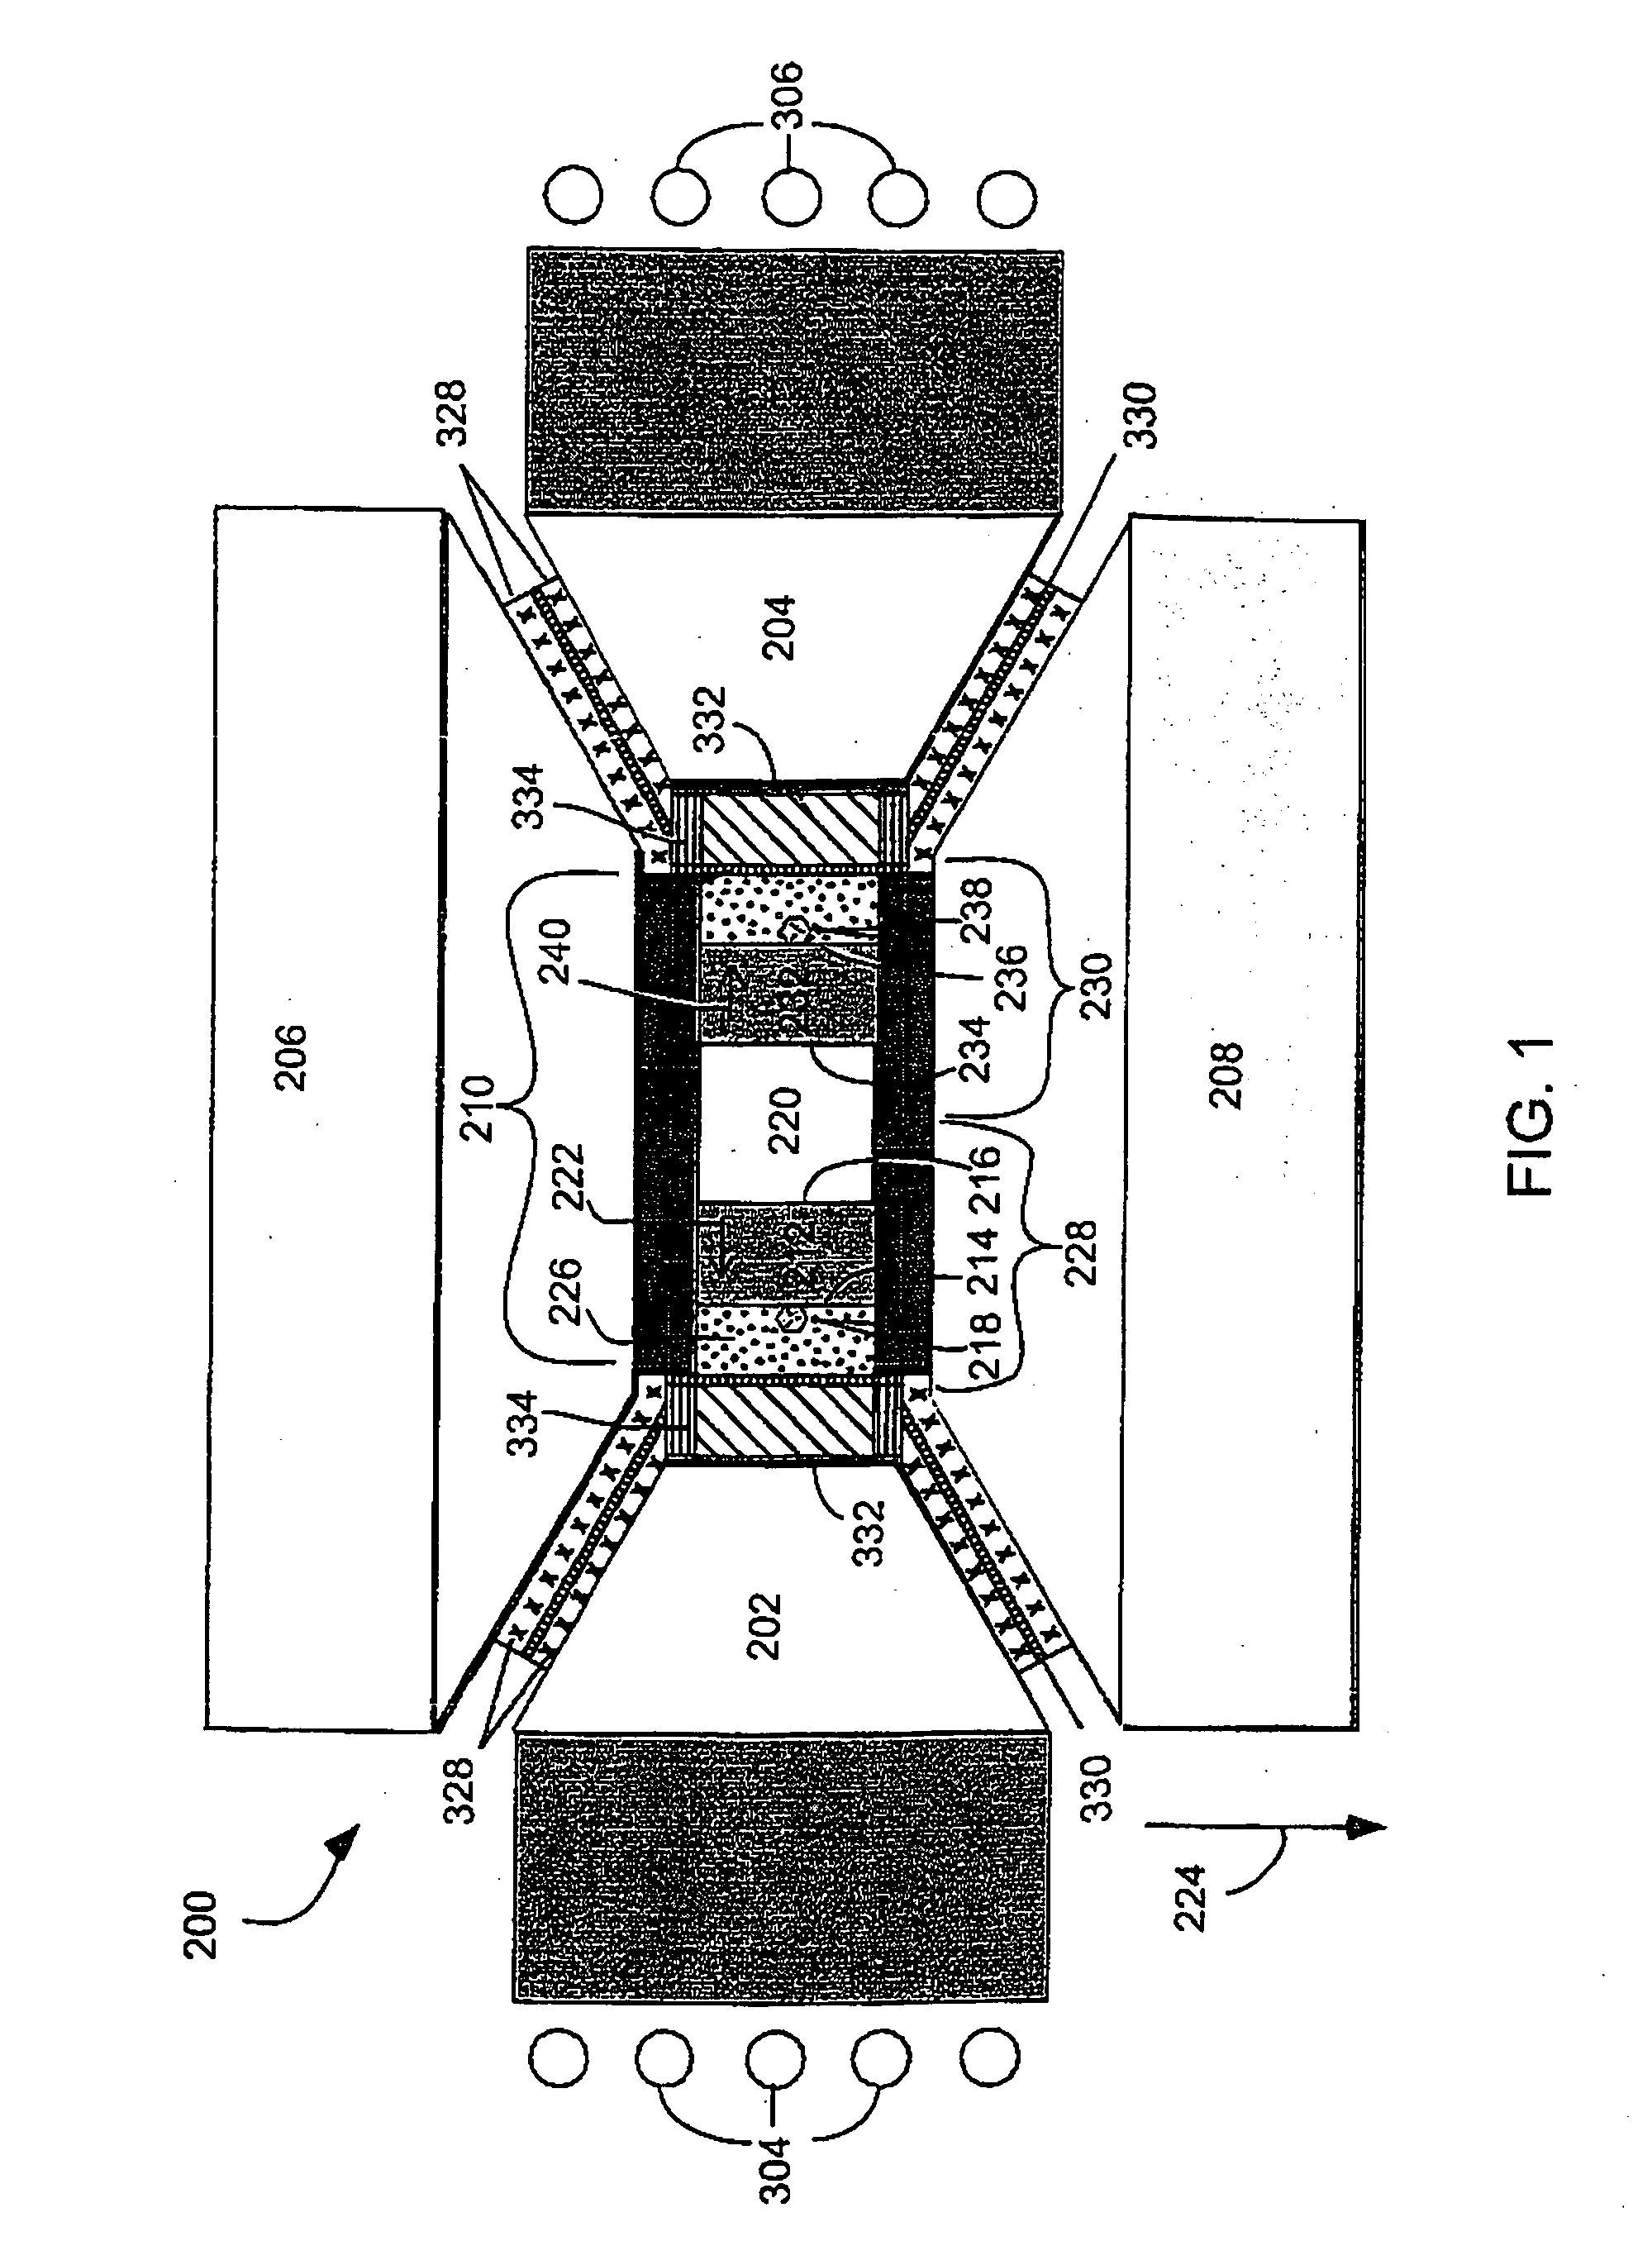 High pressure crystal growth apparatuses and associated methods